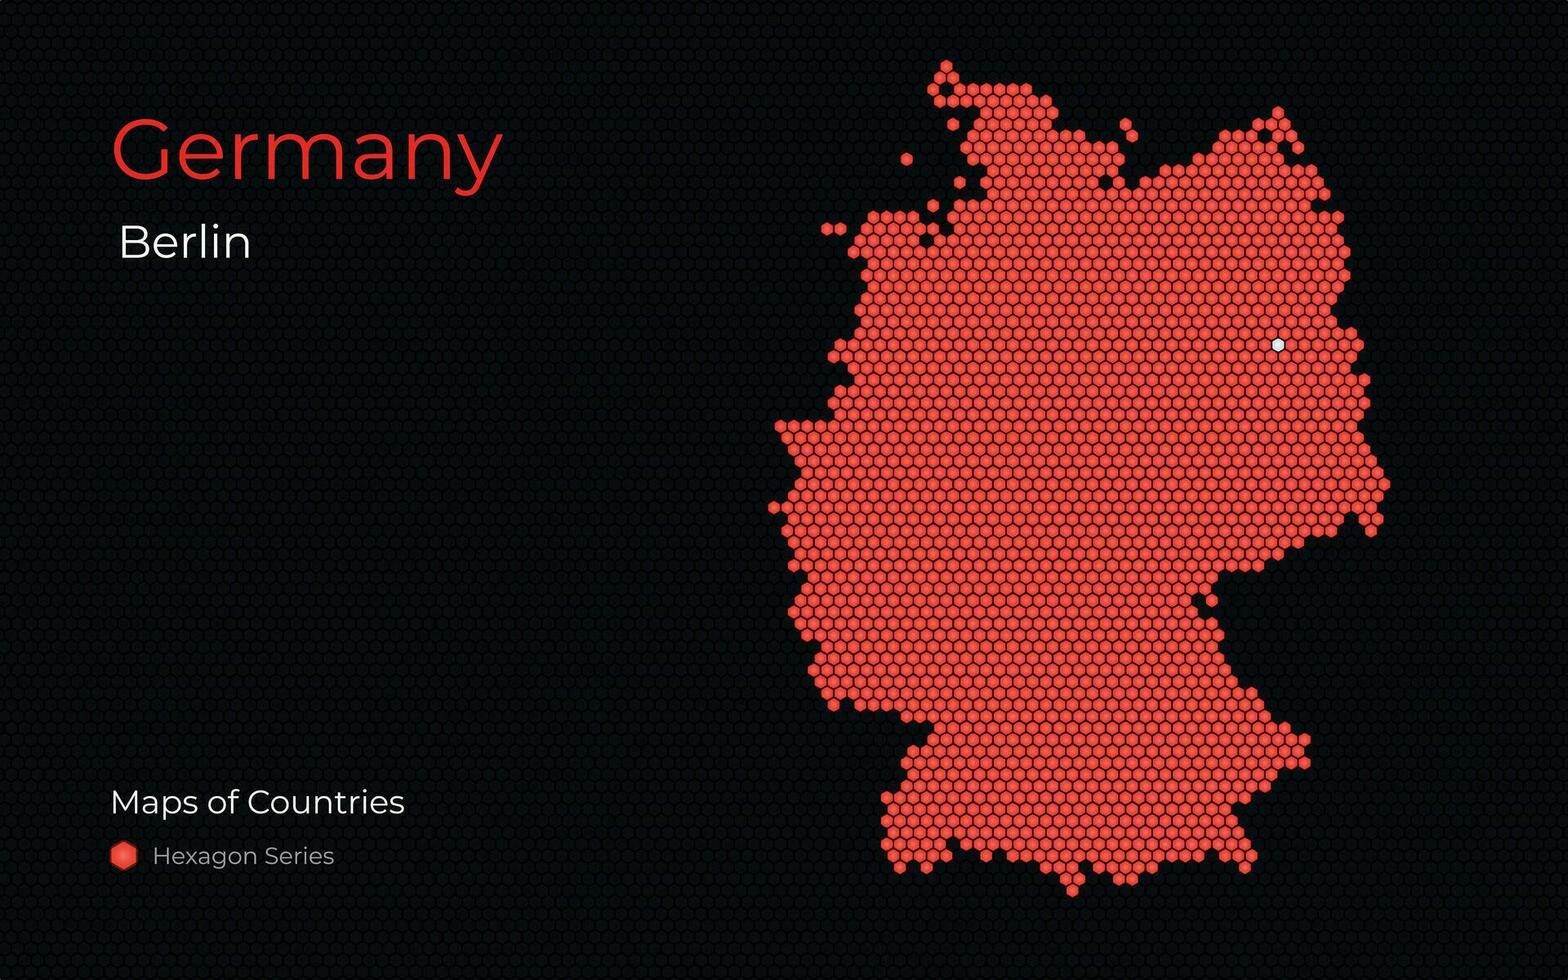 Germany, Berlin. Creative vector map. Maps of Countries, Europe, Hexagon Series.